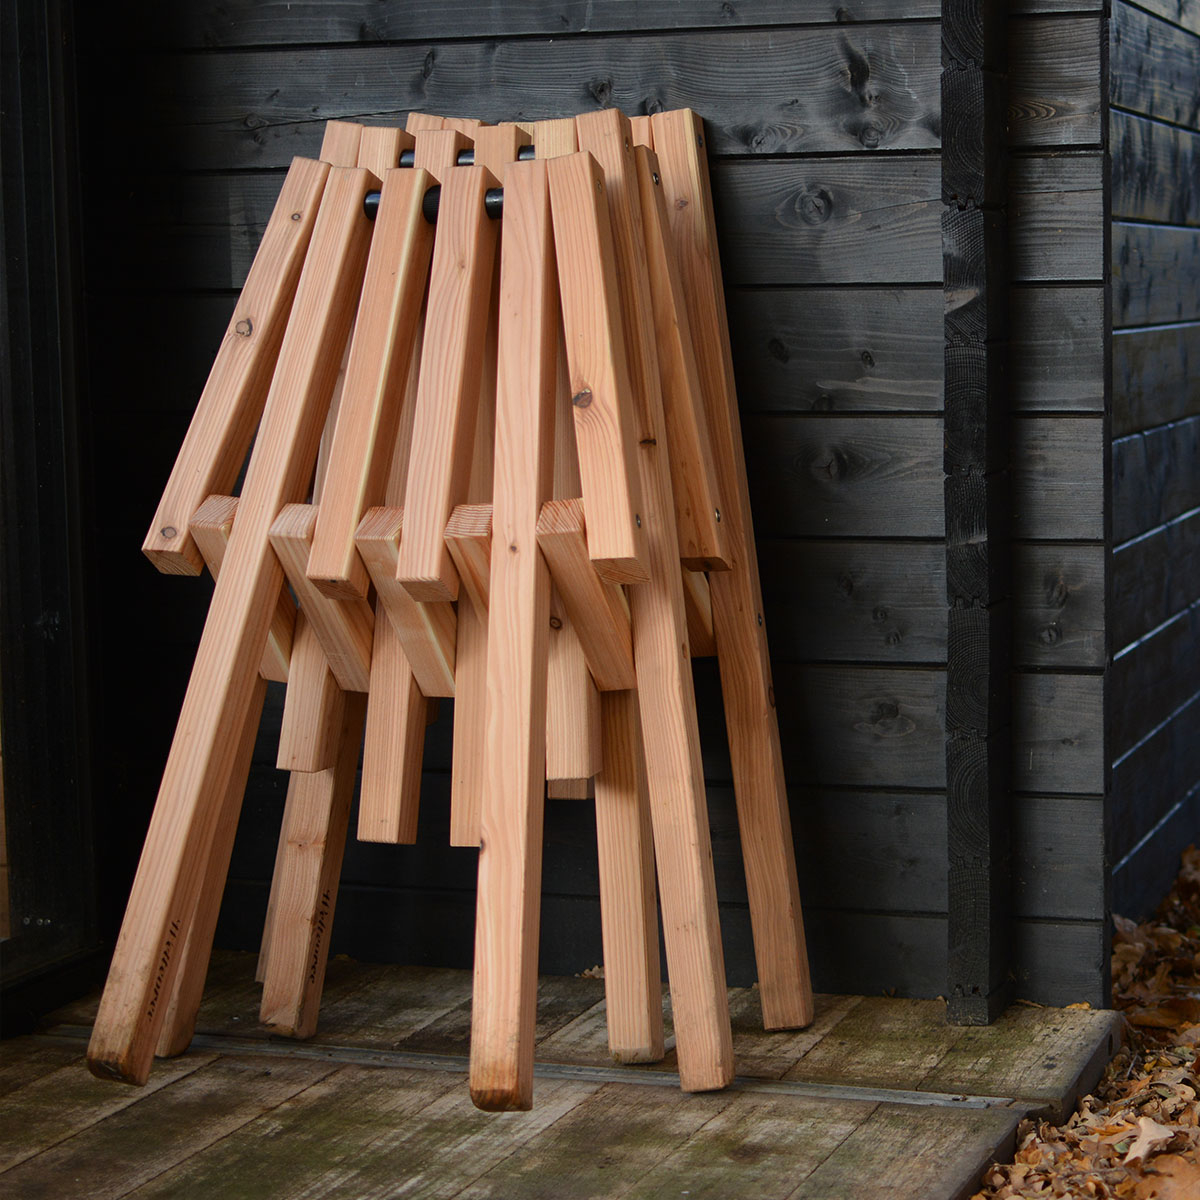 Weltevree Fieldchair, strong joints are used to fold the chair into a compact form  